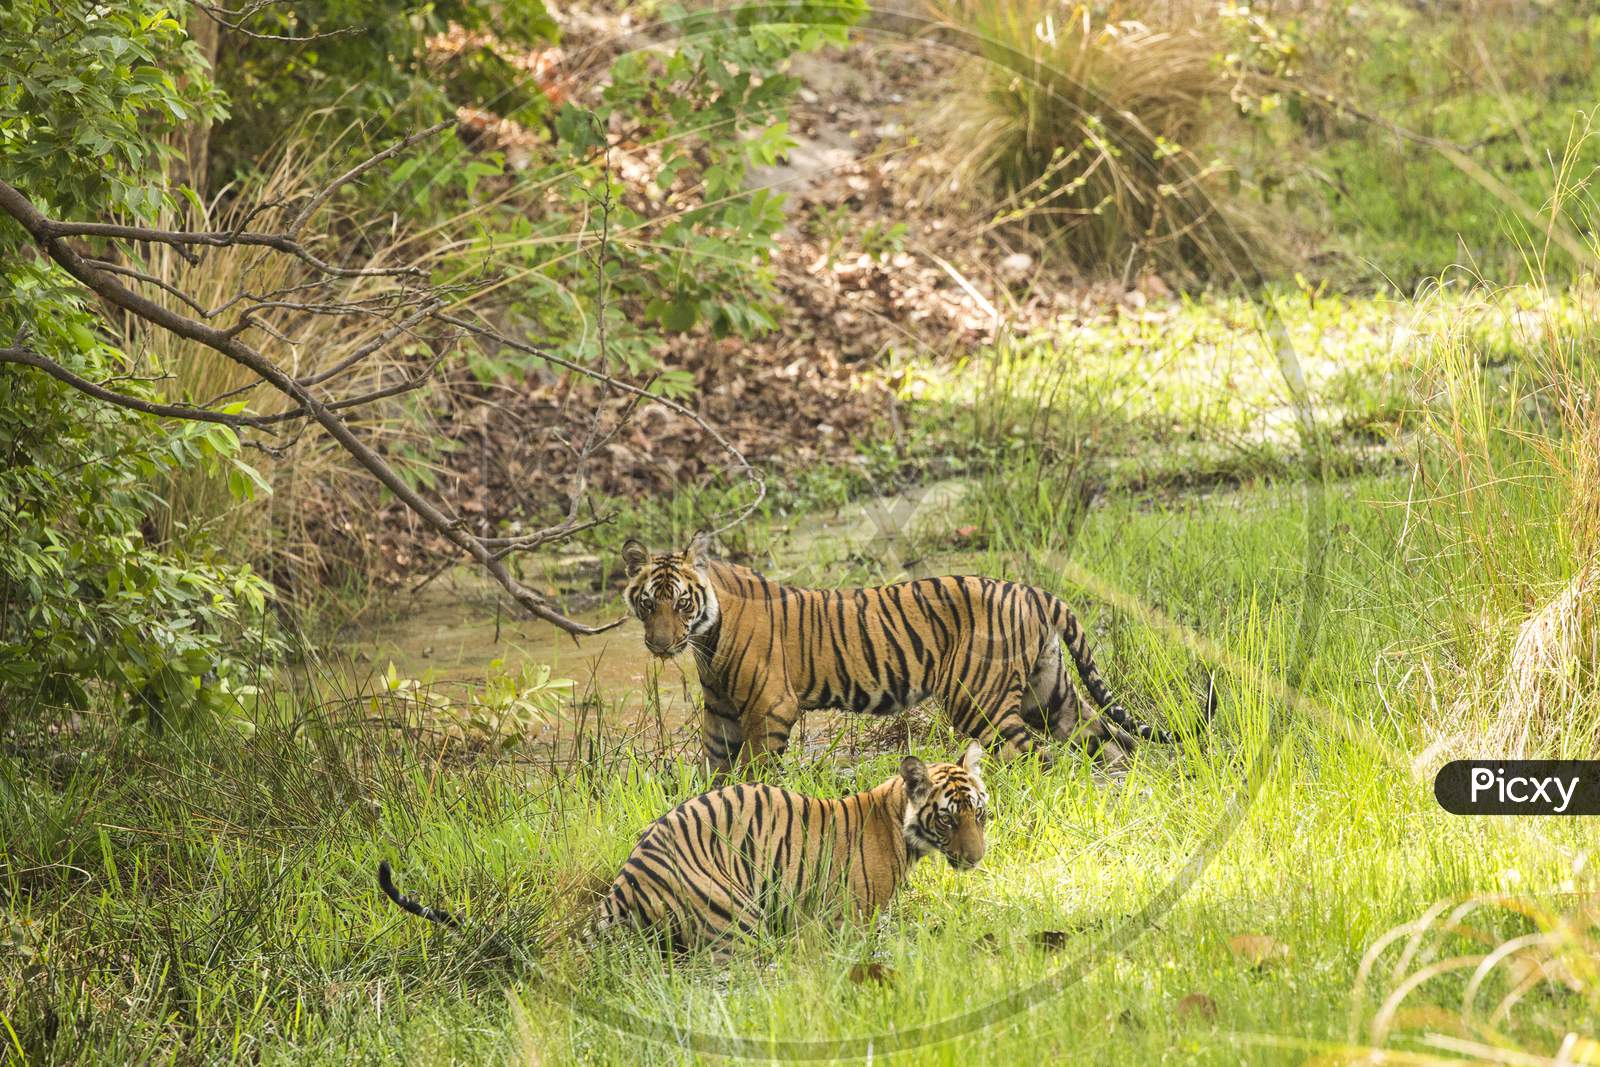 A couple of Tigers or Royal Bengal Tigers in Forest